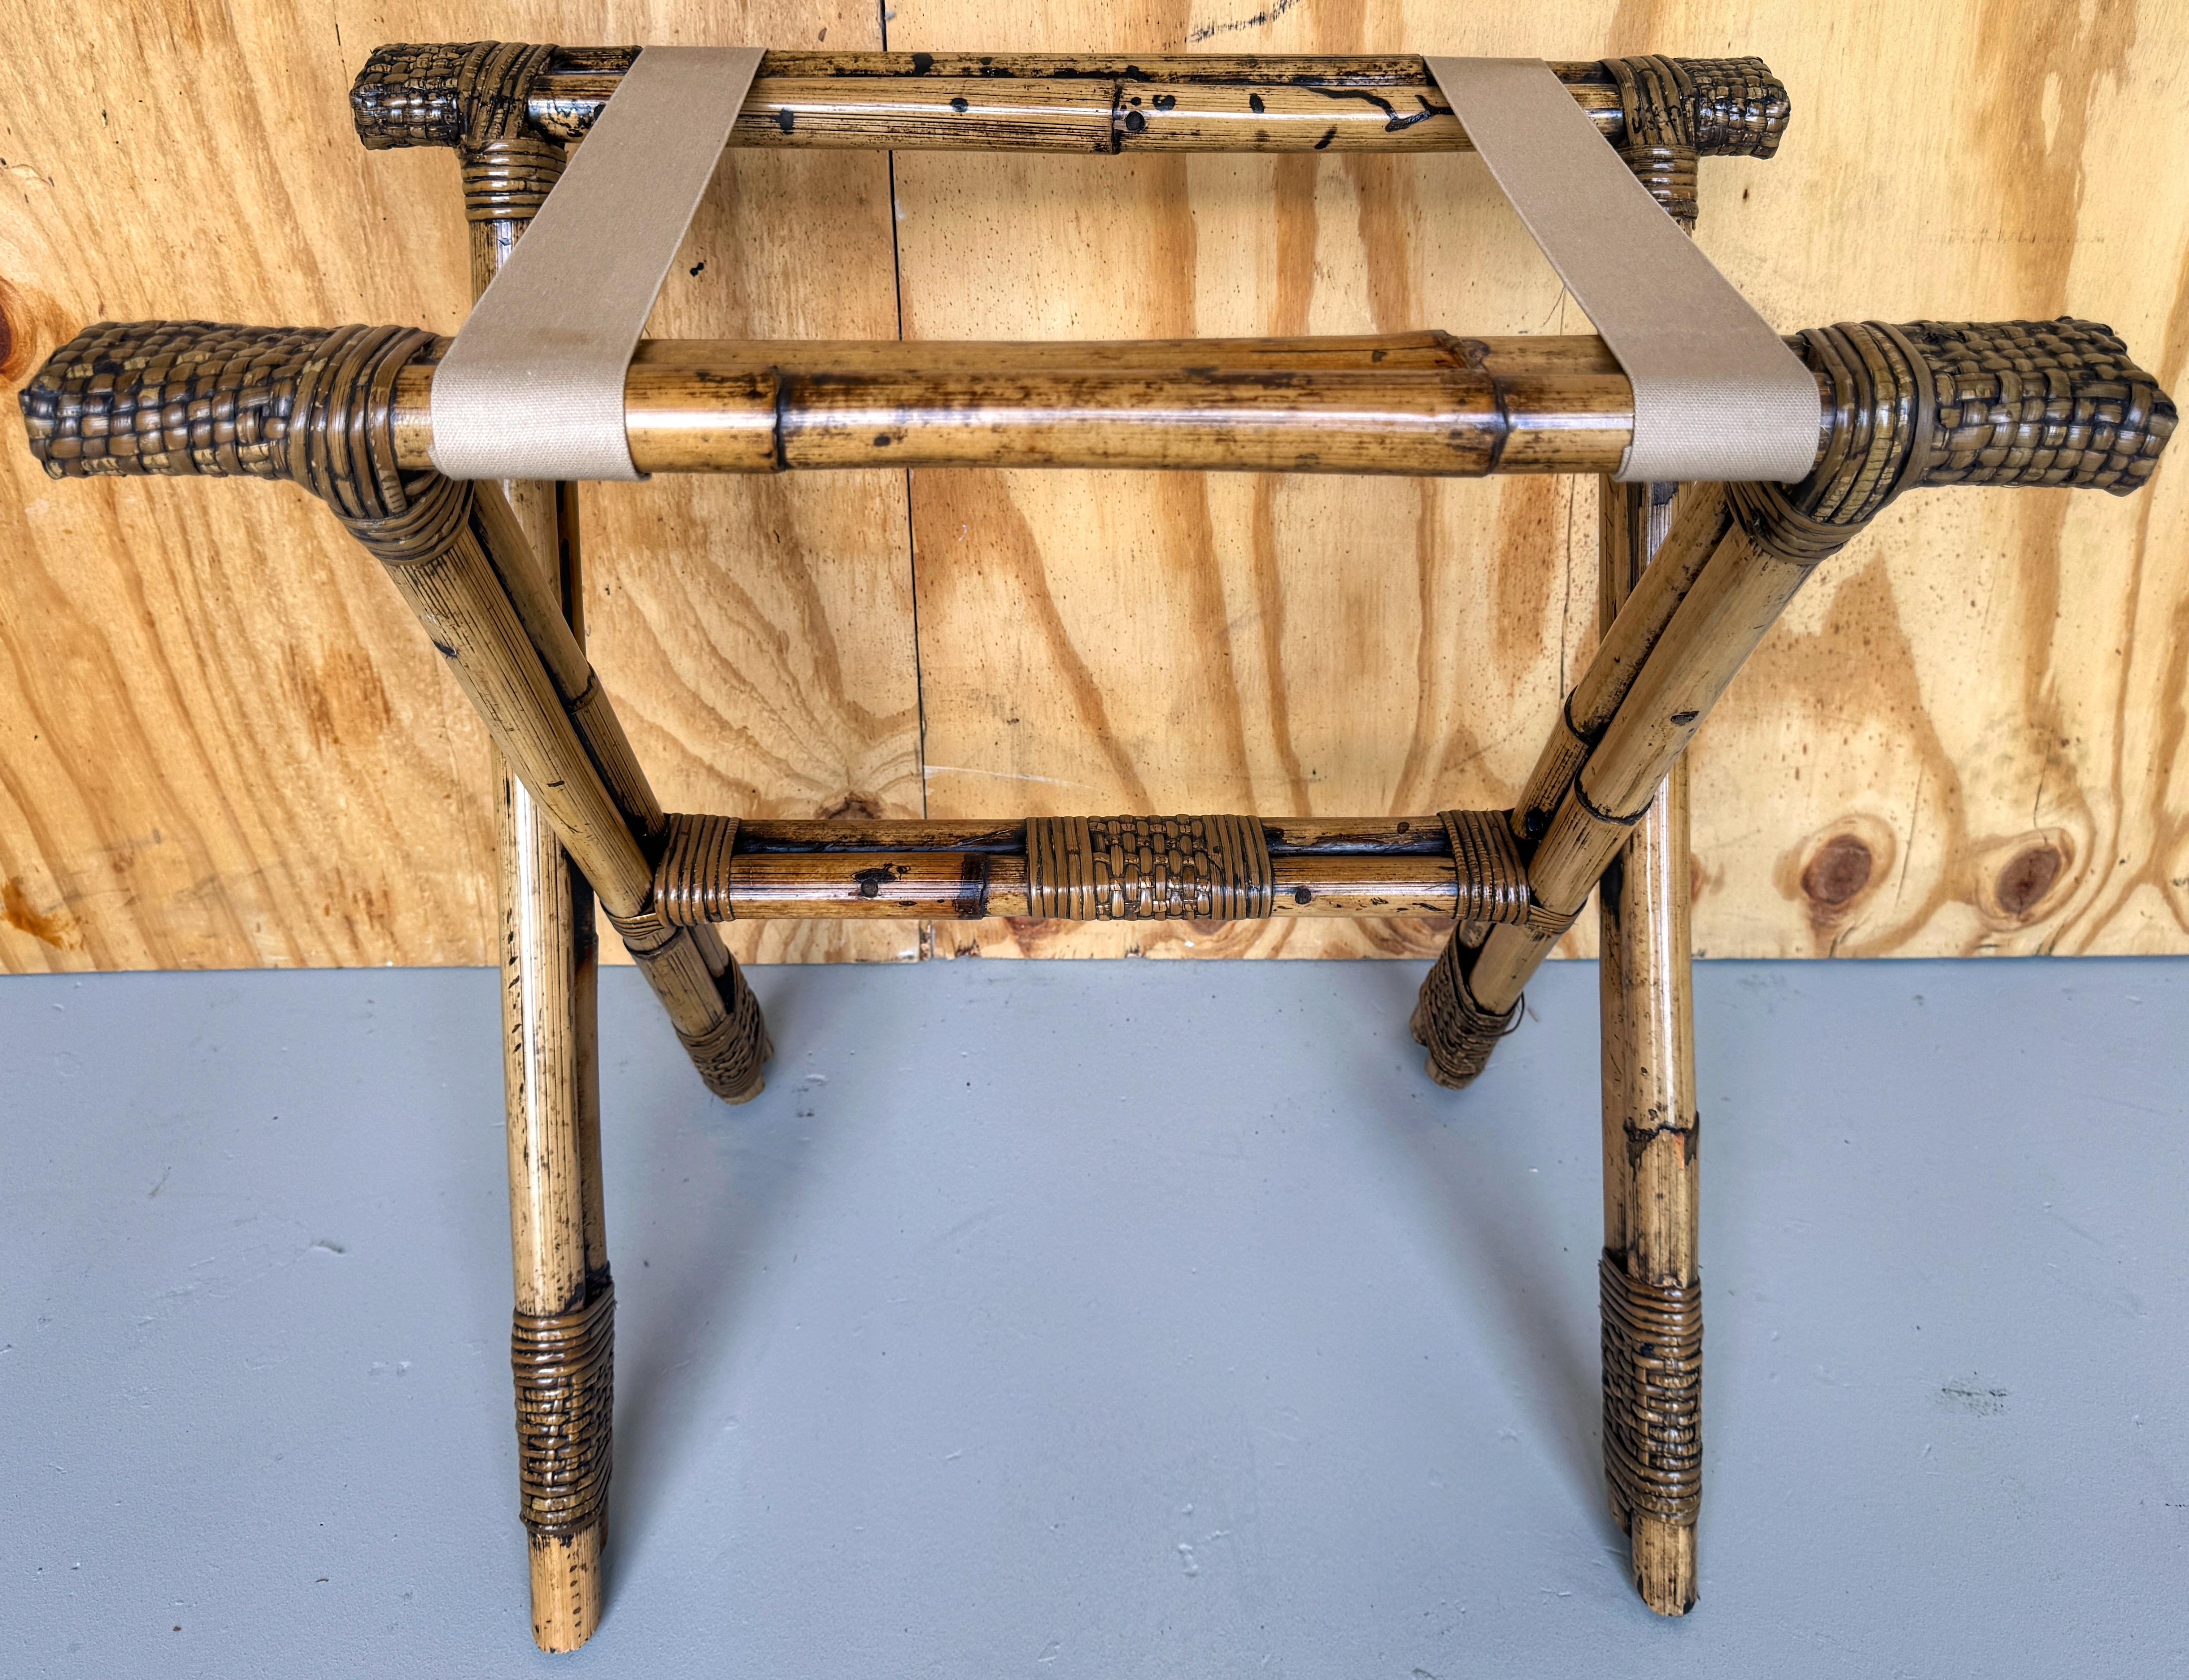 Vintage Bamboo Reed and Willow Luggage Rack/Tray Table Stand 
Asia, circa 1960s 

A stunning vintage Bamboo Reed and Willow Luggage Rack/Tray Table Stand is a versatile piece blending functionality with natural elegance. Made of sturdy specimen